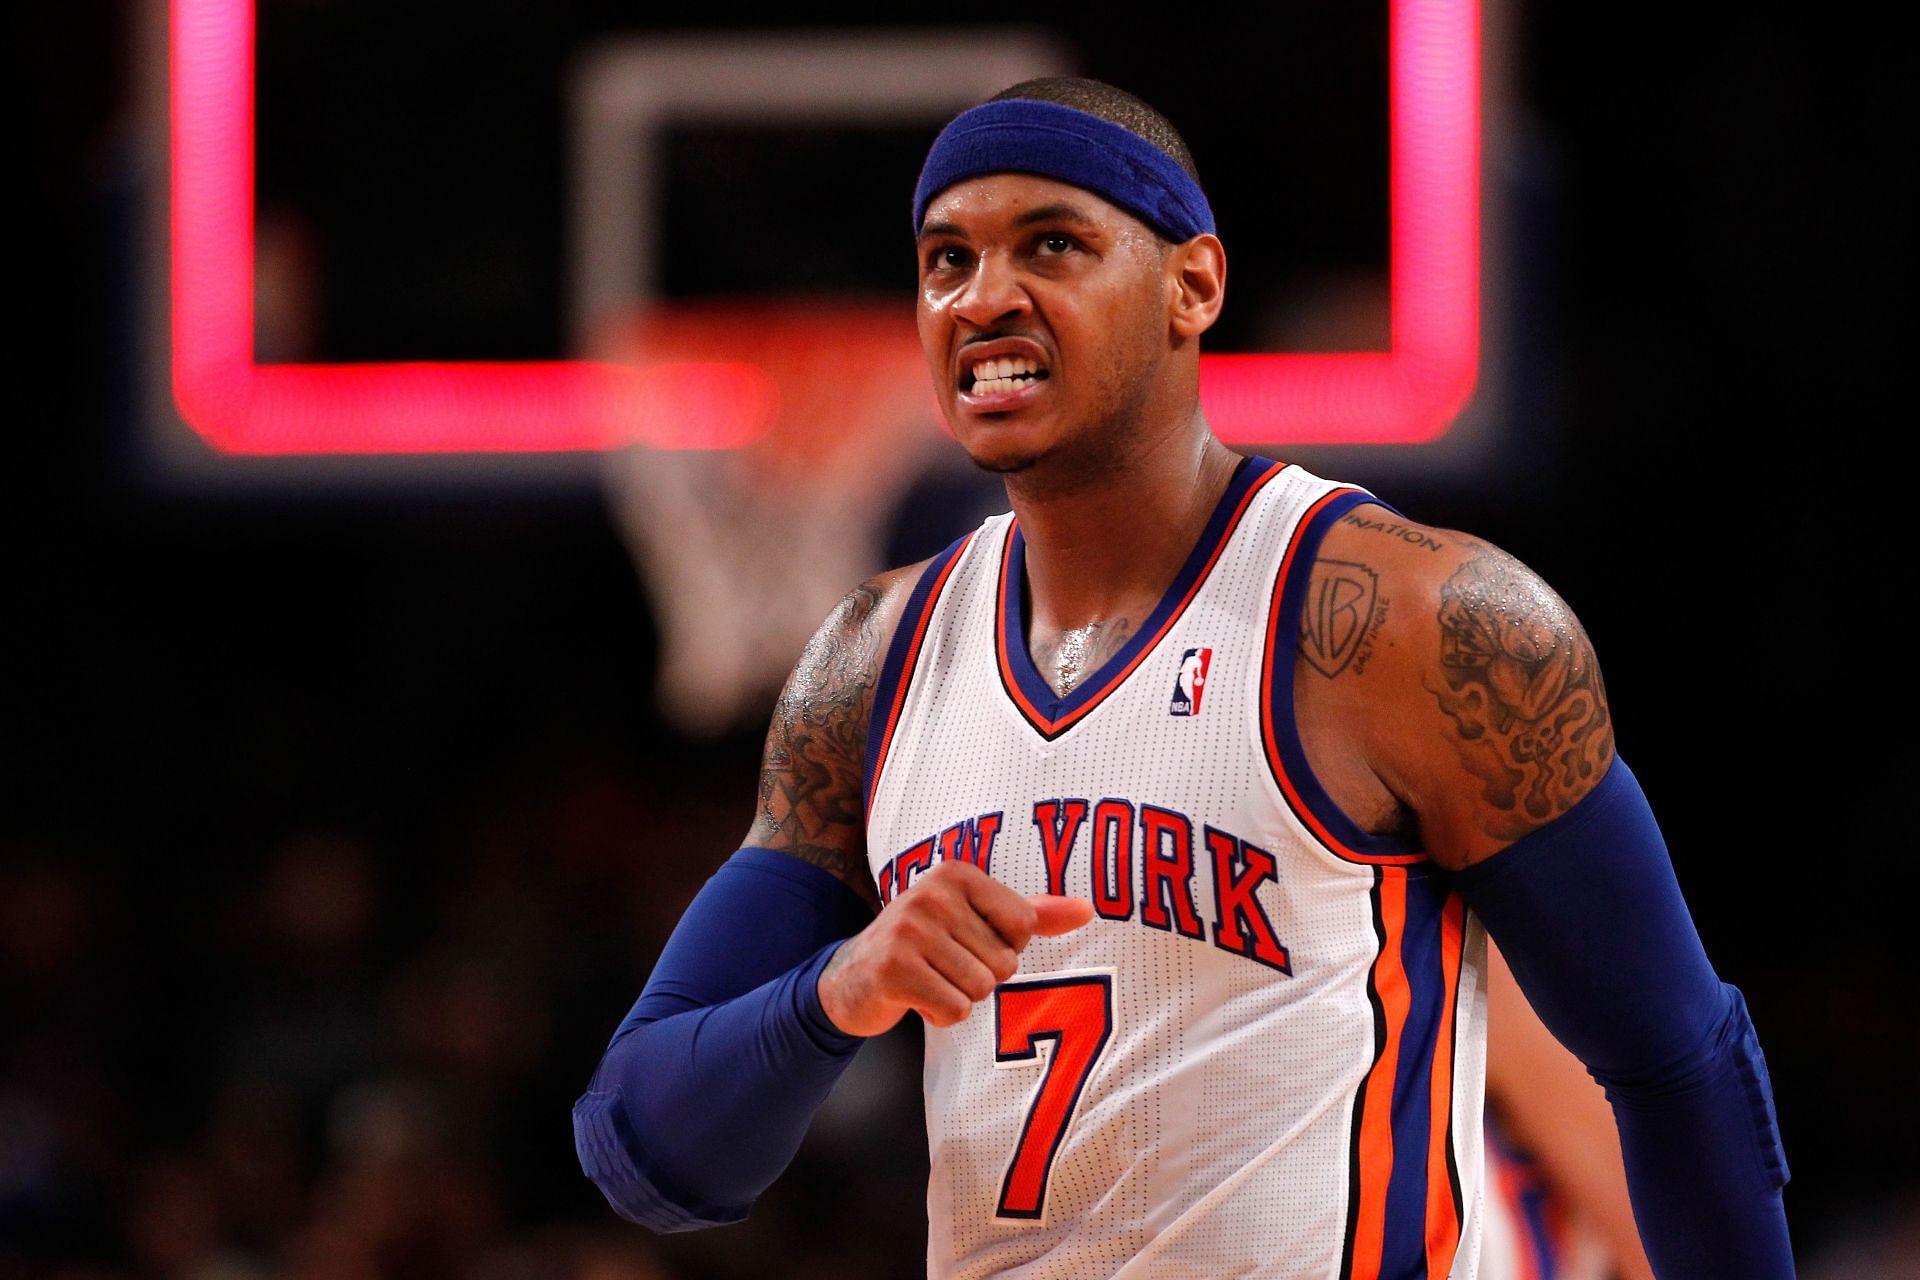 Carmelo Anthony during his time with the New York Knicks